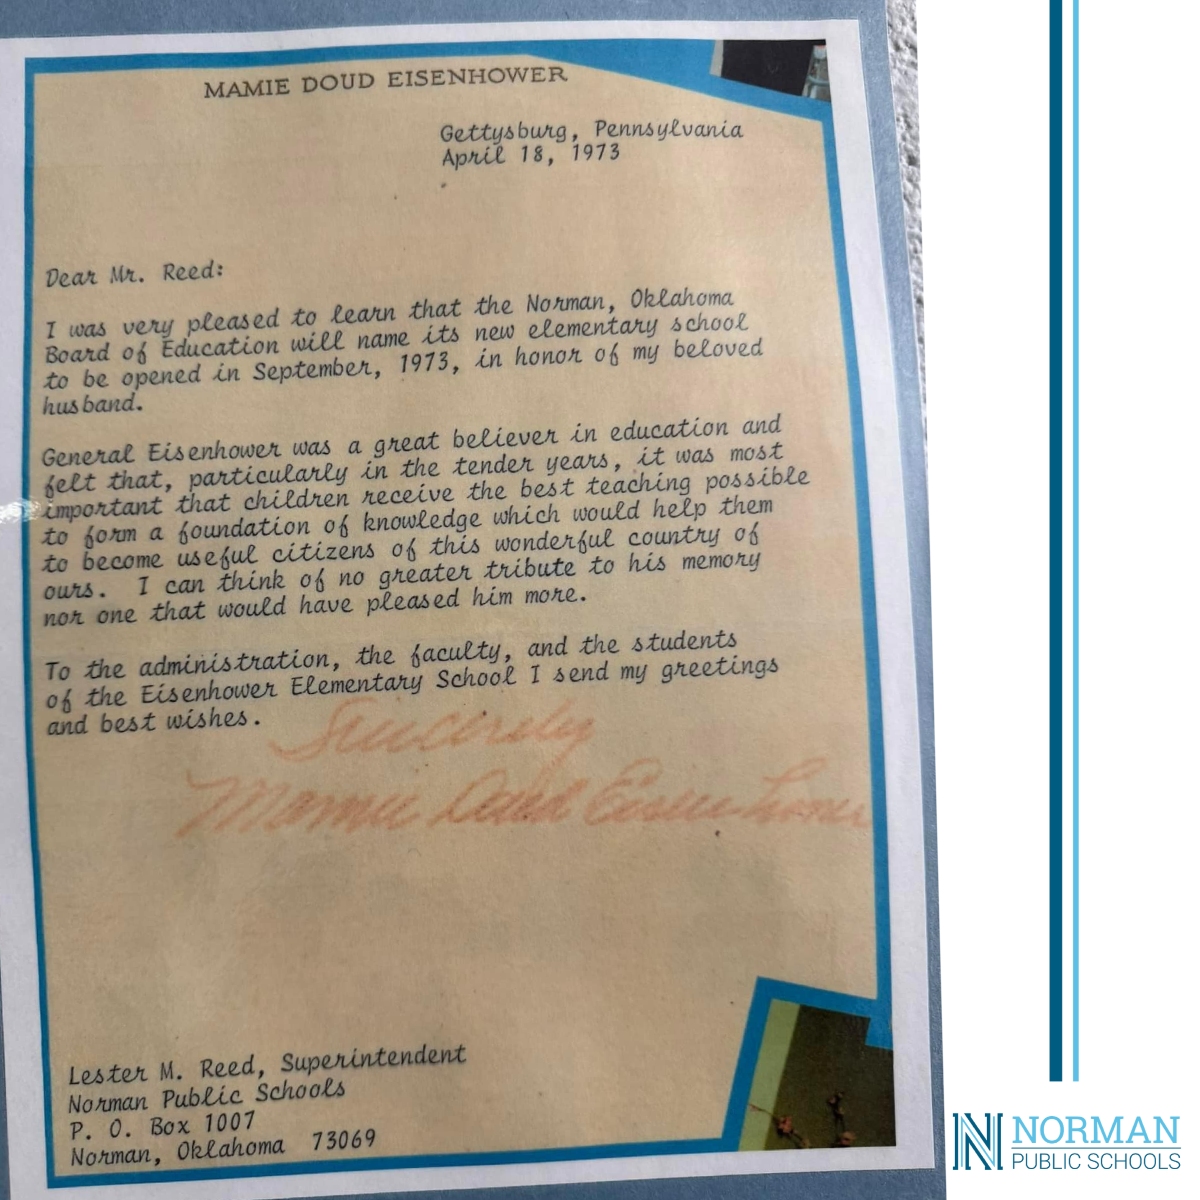 #TBT to 1973 when new NPS elementary school, Eisenhower Elementary, received a letter from Mamie Eisenhower! Eisenhower Elem recently celebrated 50 years 🎉. They had this letter from the First Lady on display. Via The Lester Reed Music Project #NPSProud #NPSGoodThings